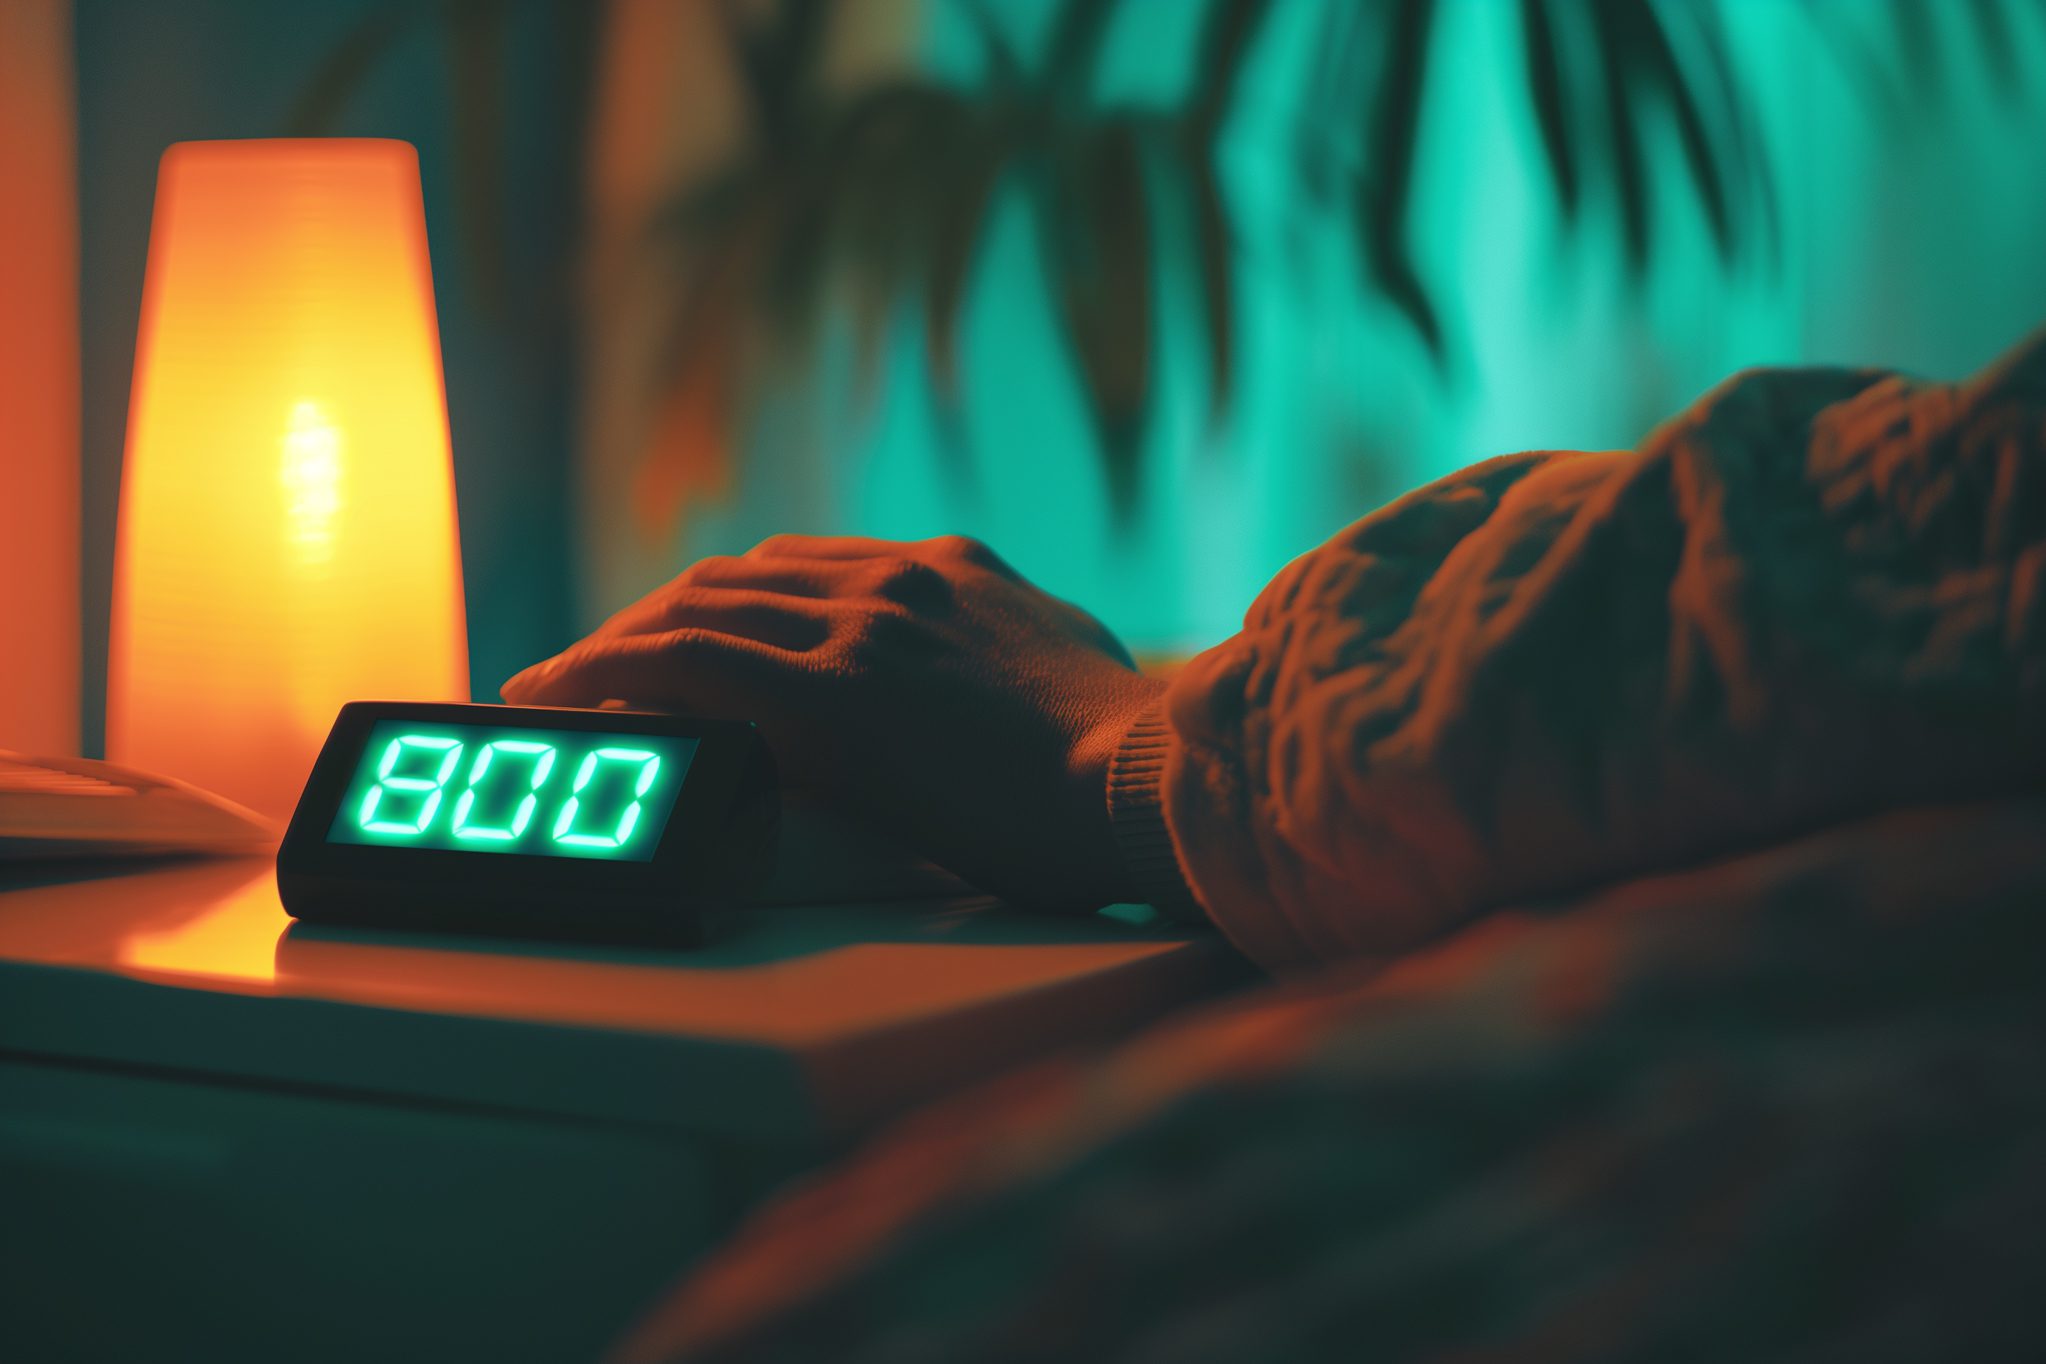 Snooze Button and Sleep Quality: What Research Says